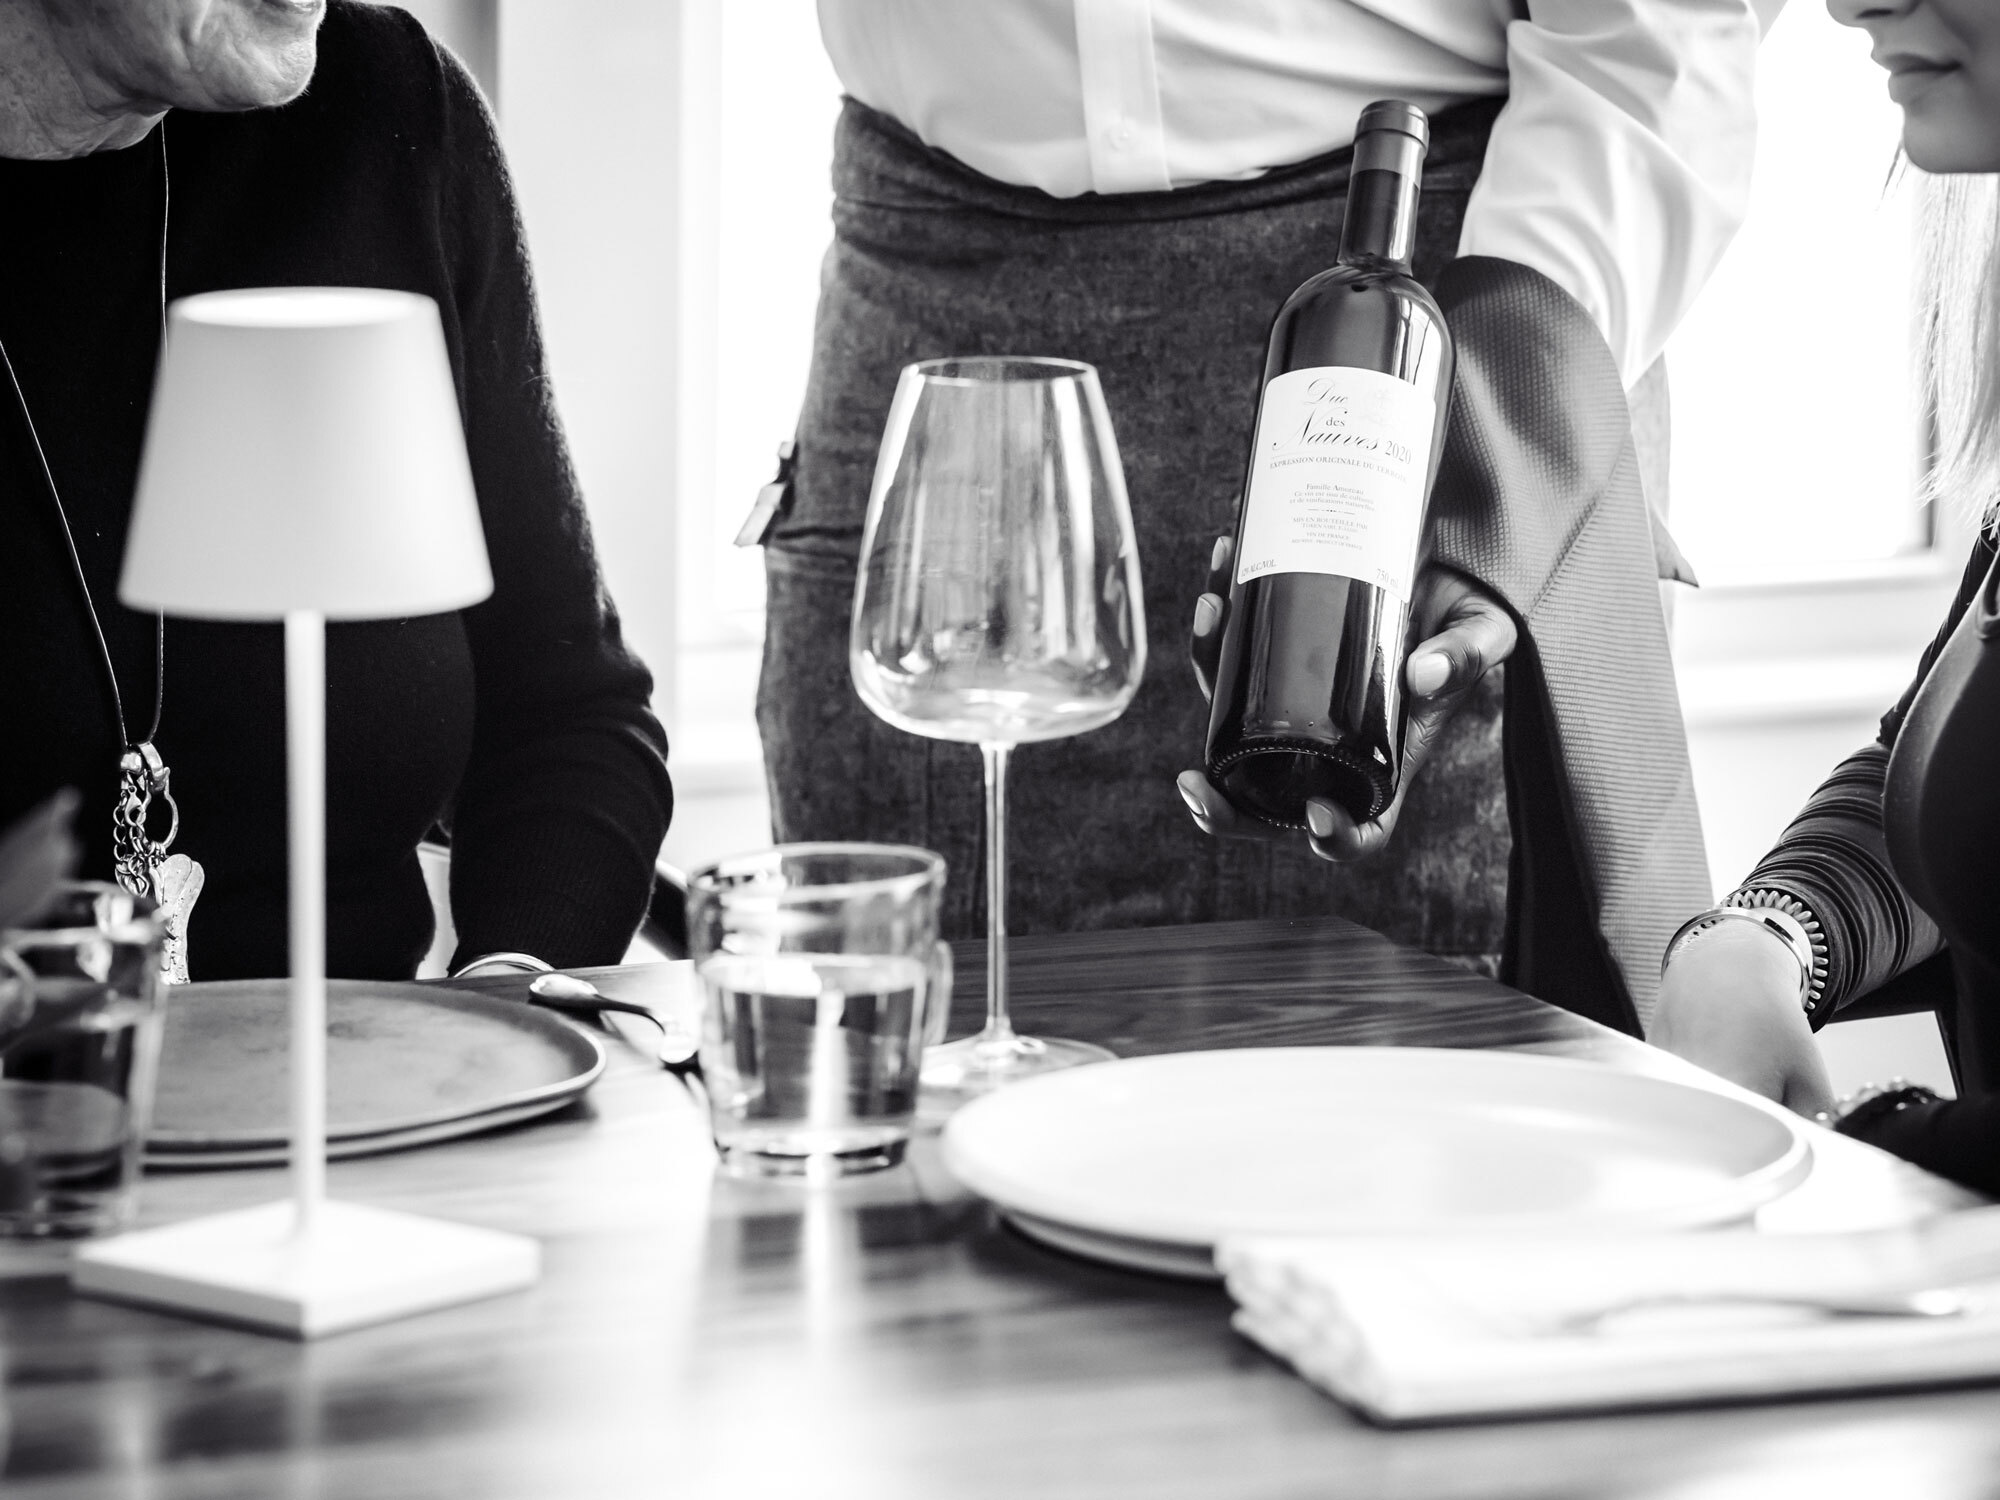 Waiter showing guests bottle of wine